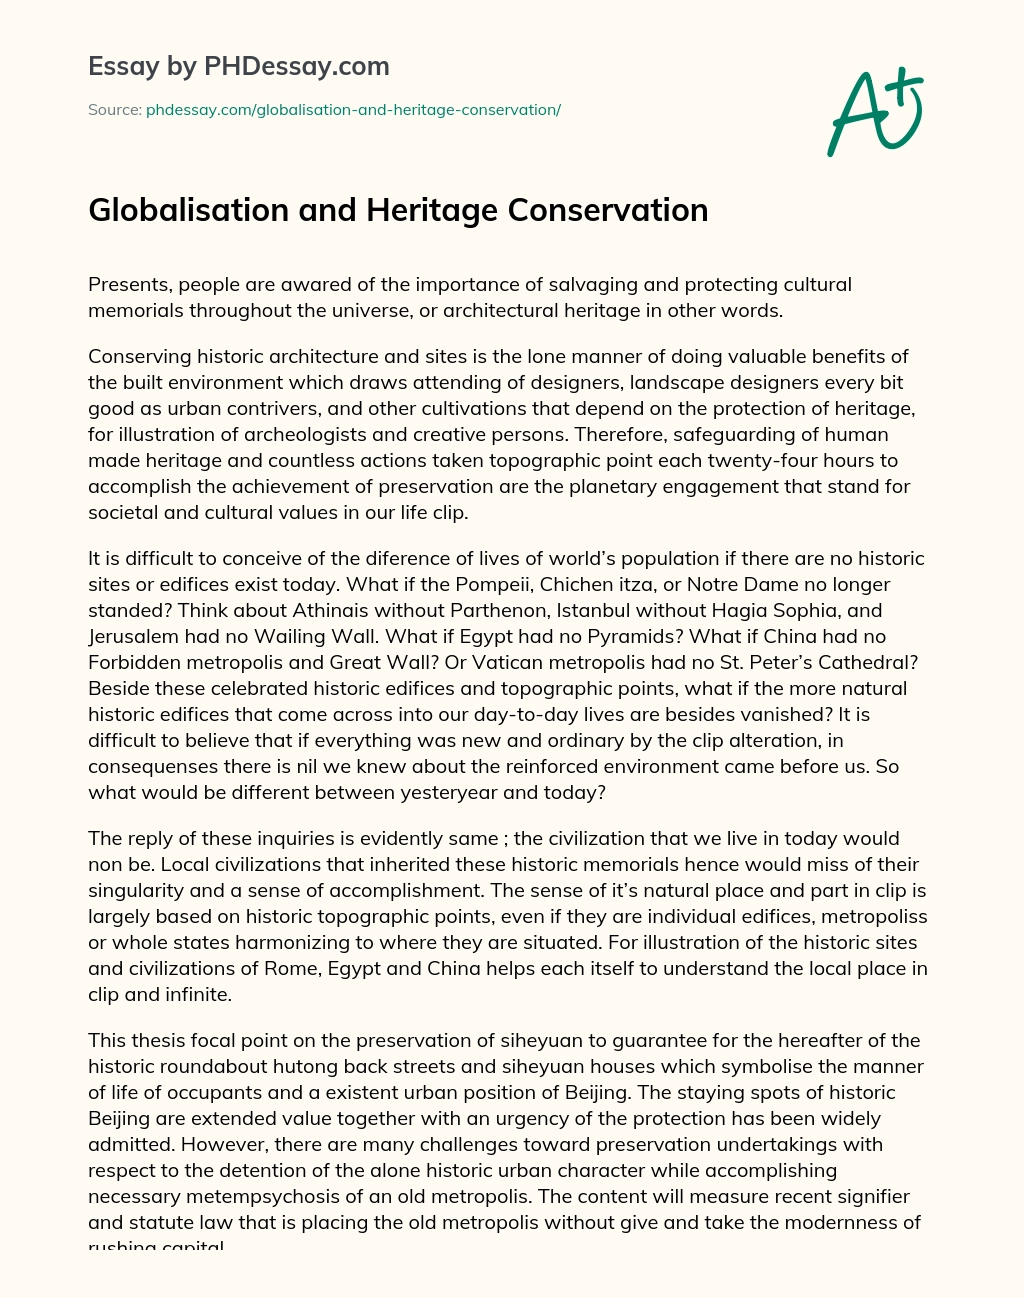 Globalisation and Heritage Conservation essay